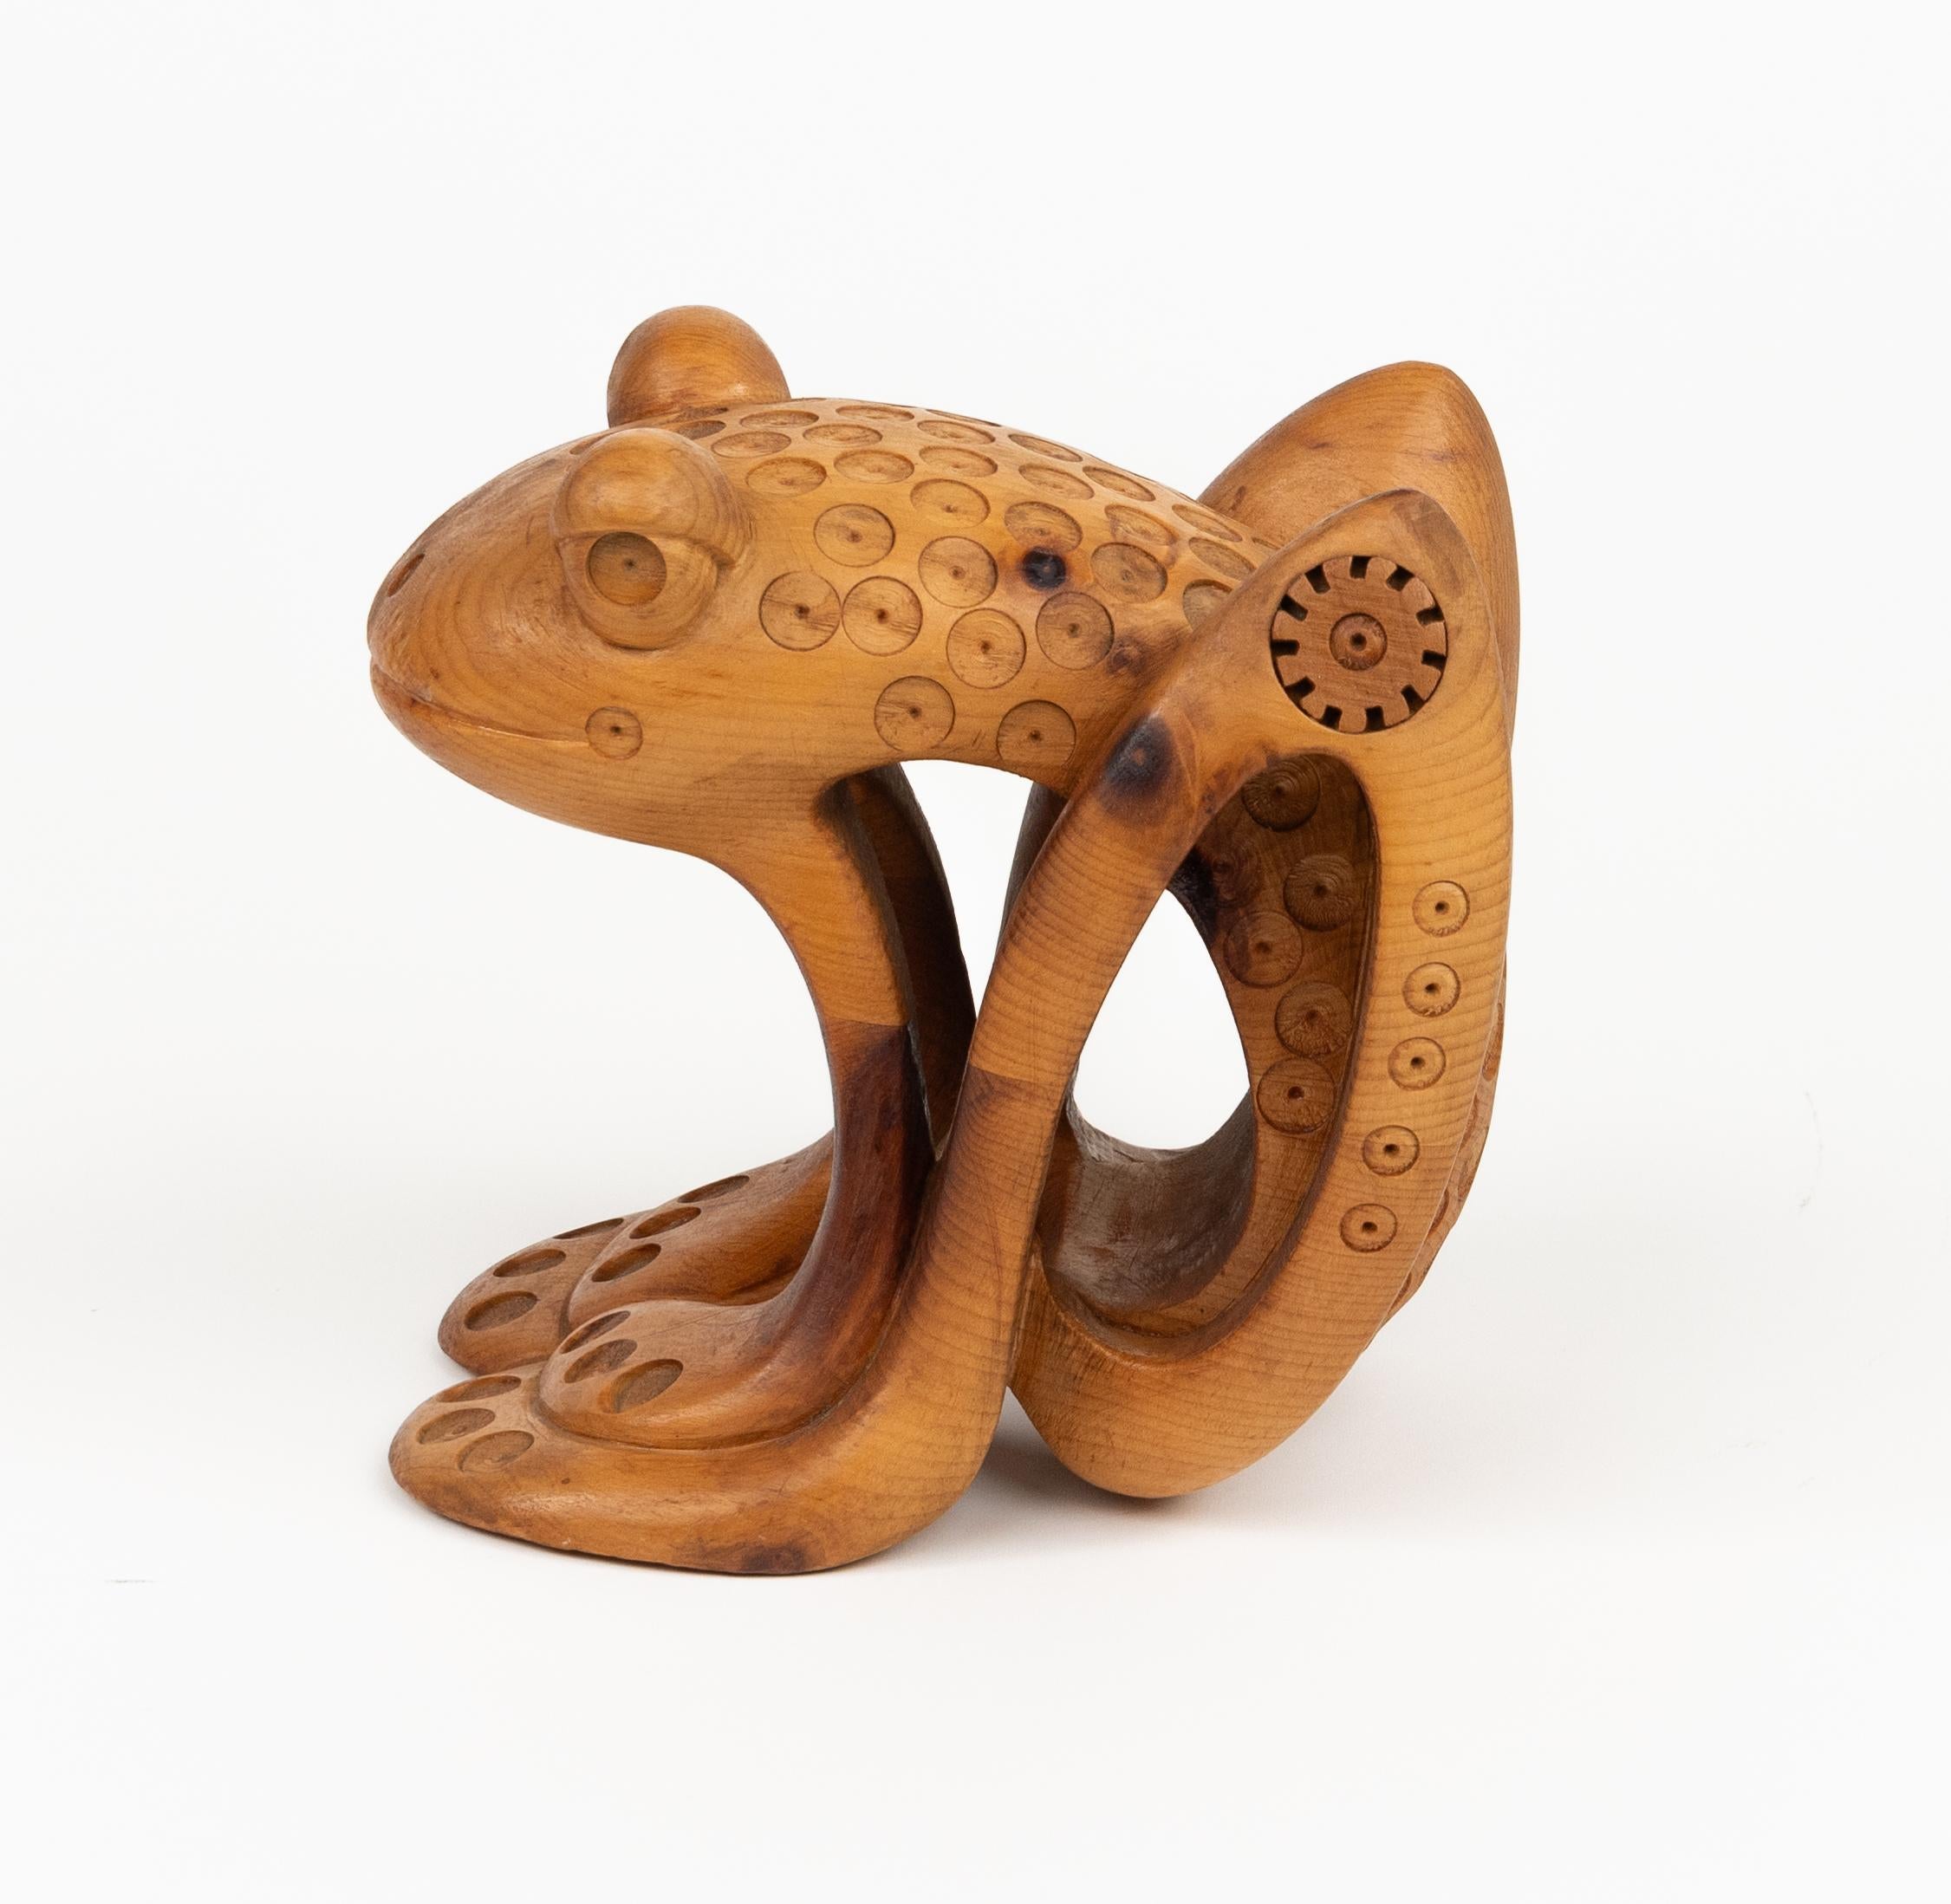 Contemporary Pine Wood Decorative Sculpture Shape Frog by Ferdinando Codognotto, Italy 2001 For Sale